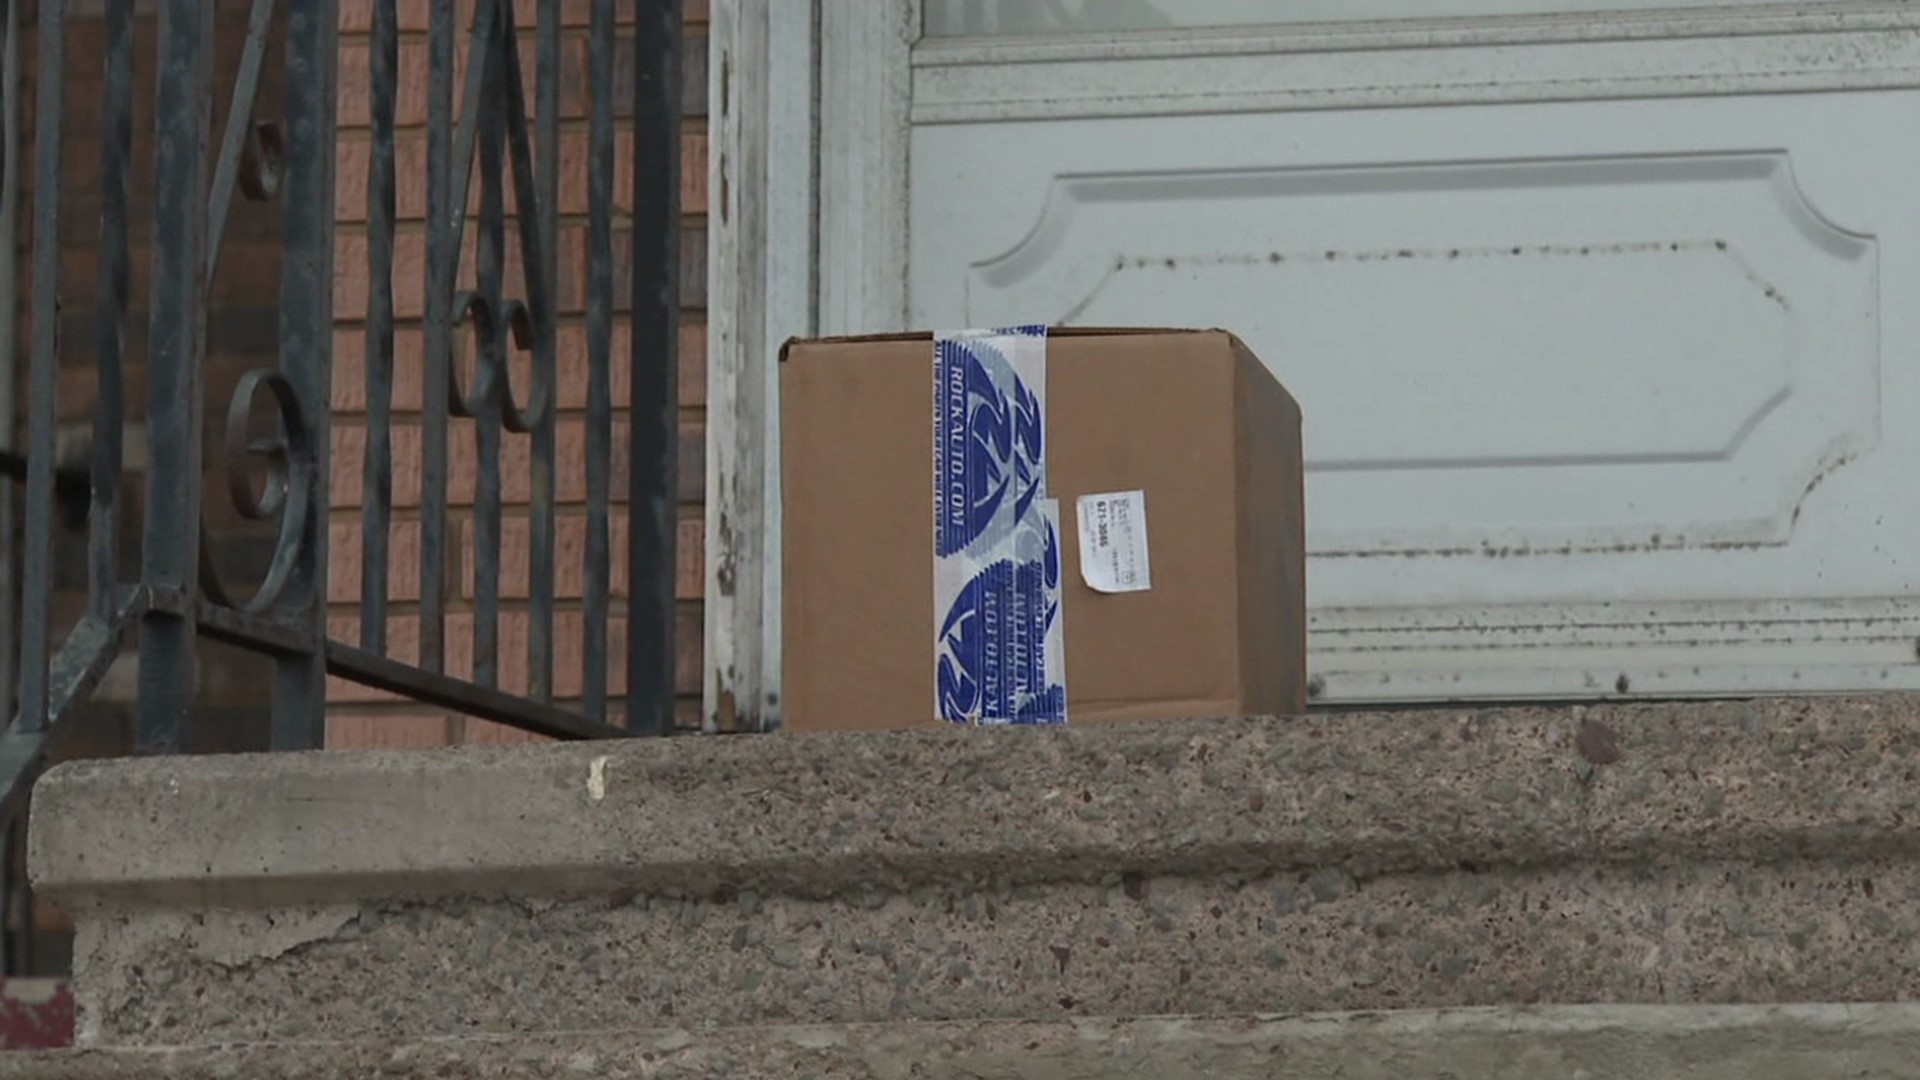 A surge in online shopping due to the pandemic is causing concern that thieves, often called "porch pirates" may help themselves to packages delivered to your door.